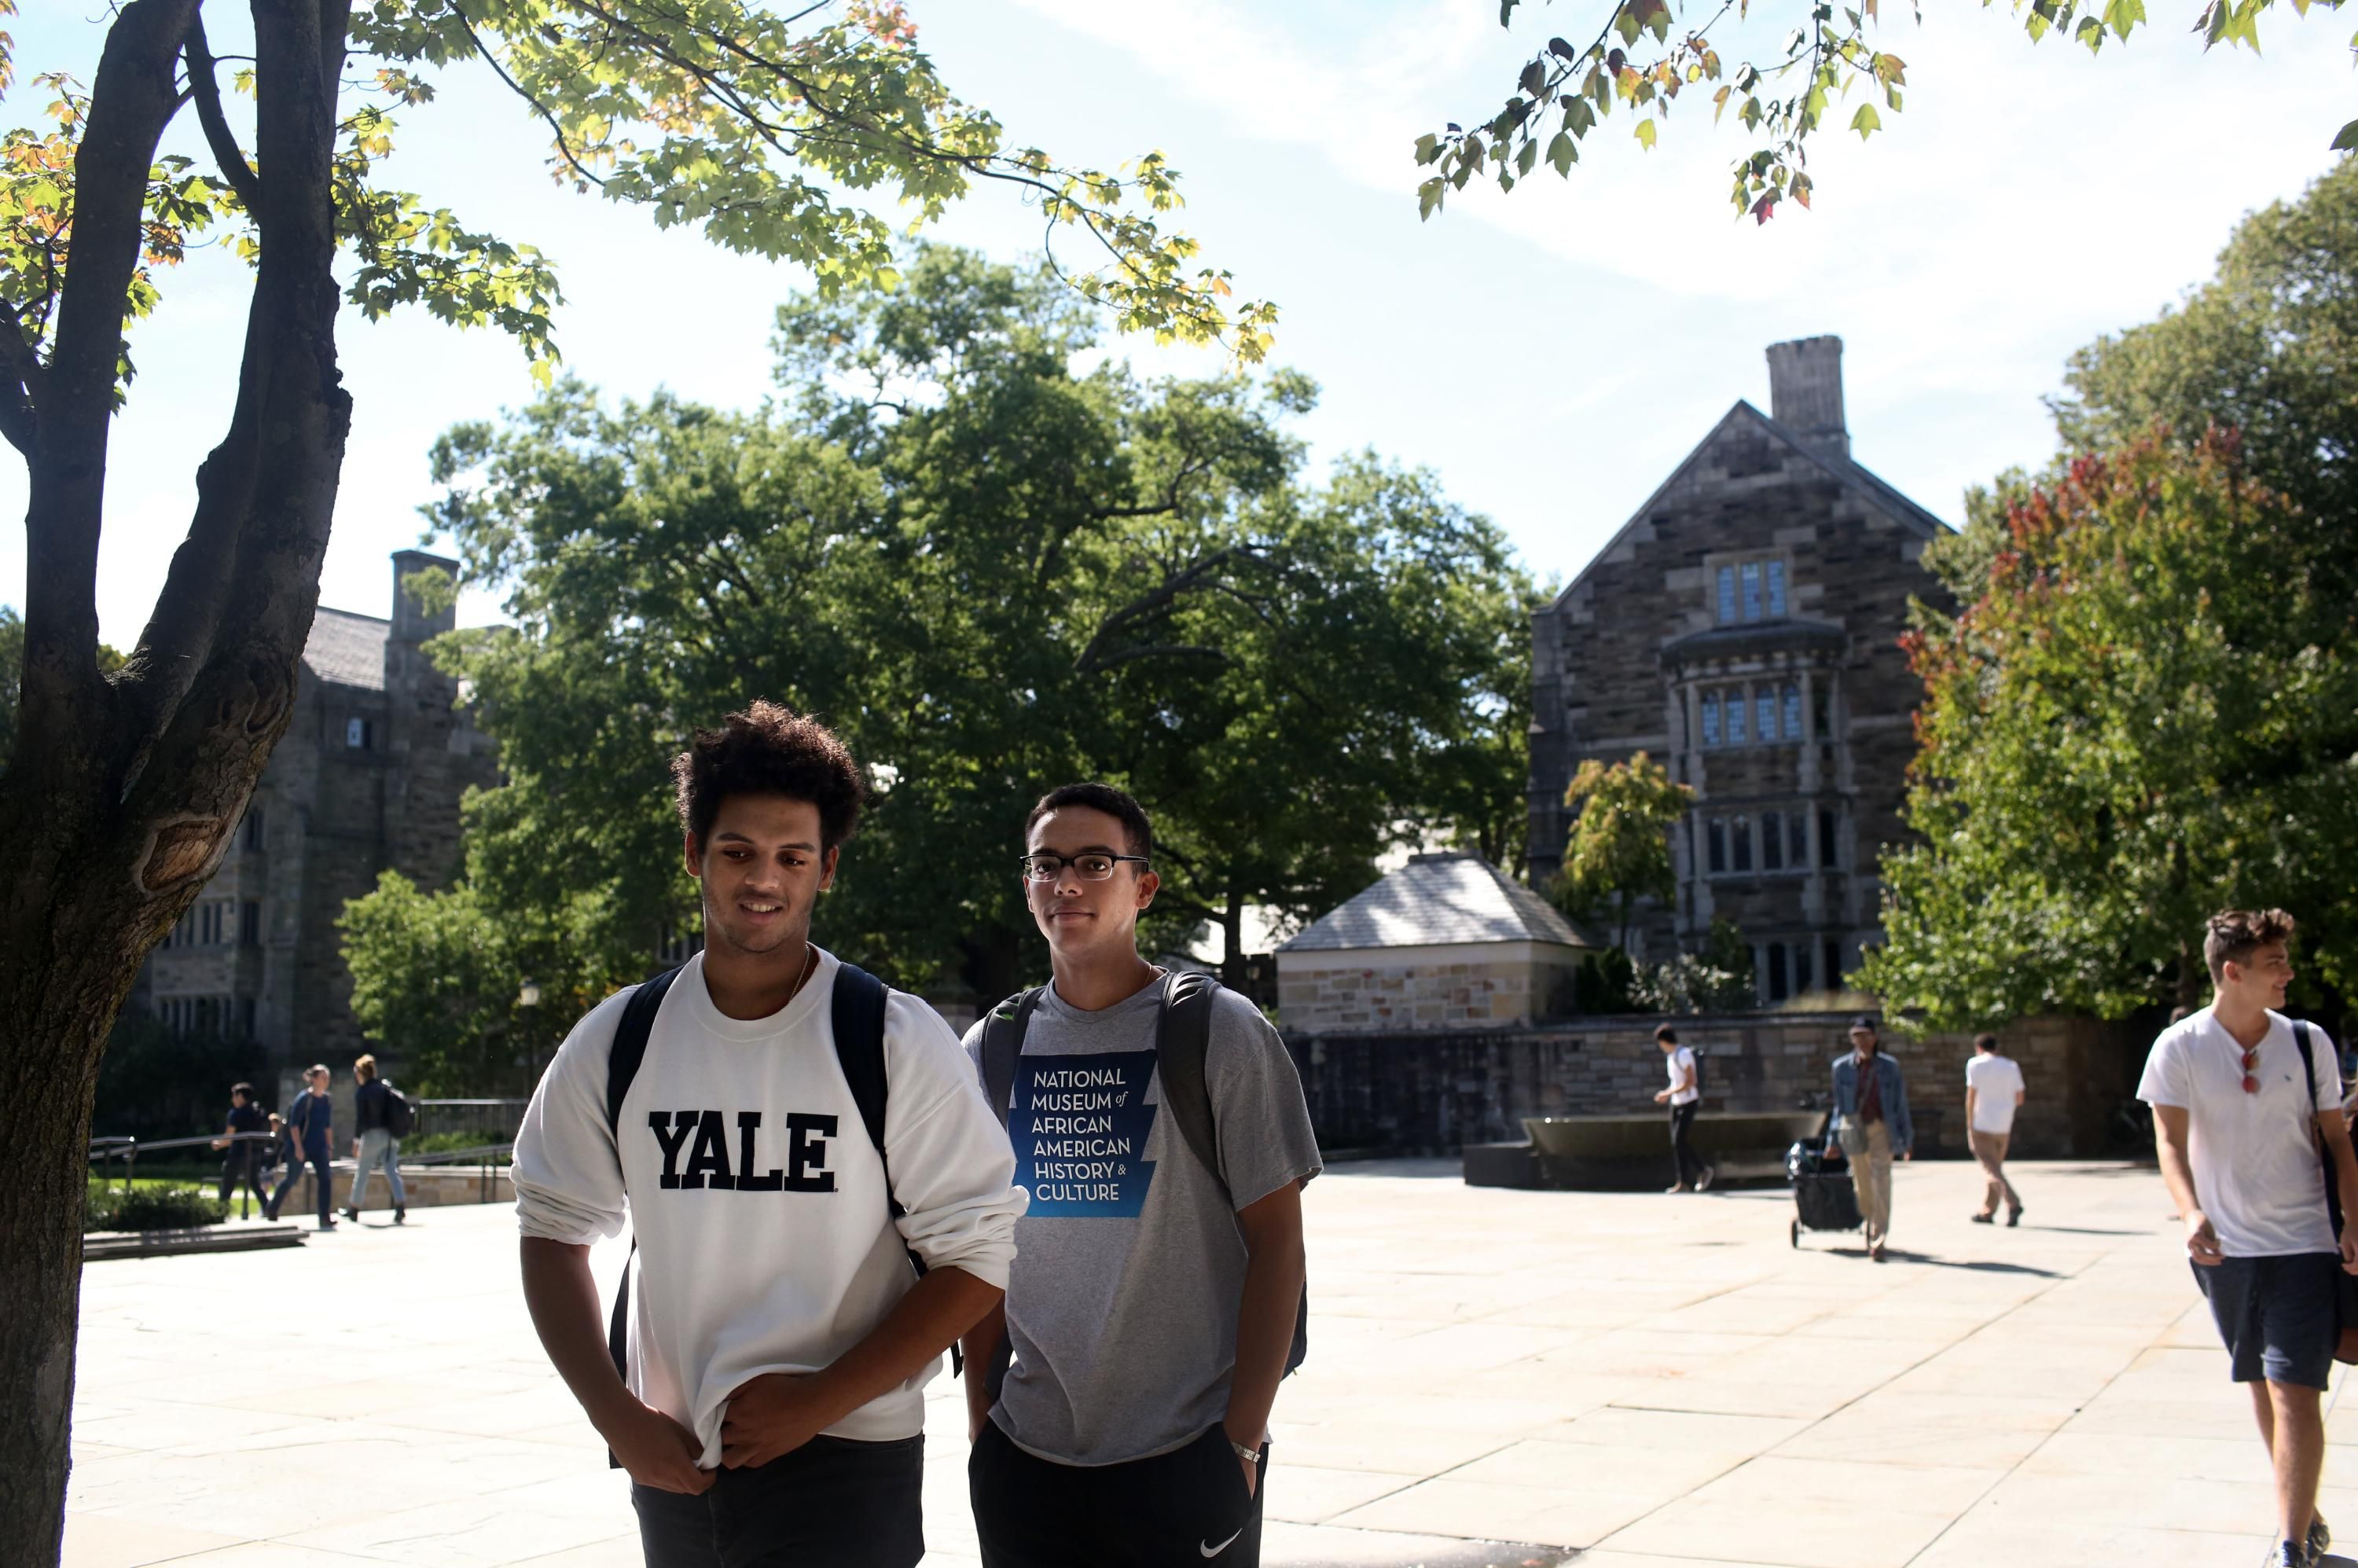 Students on Yale campus